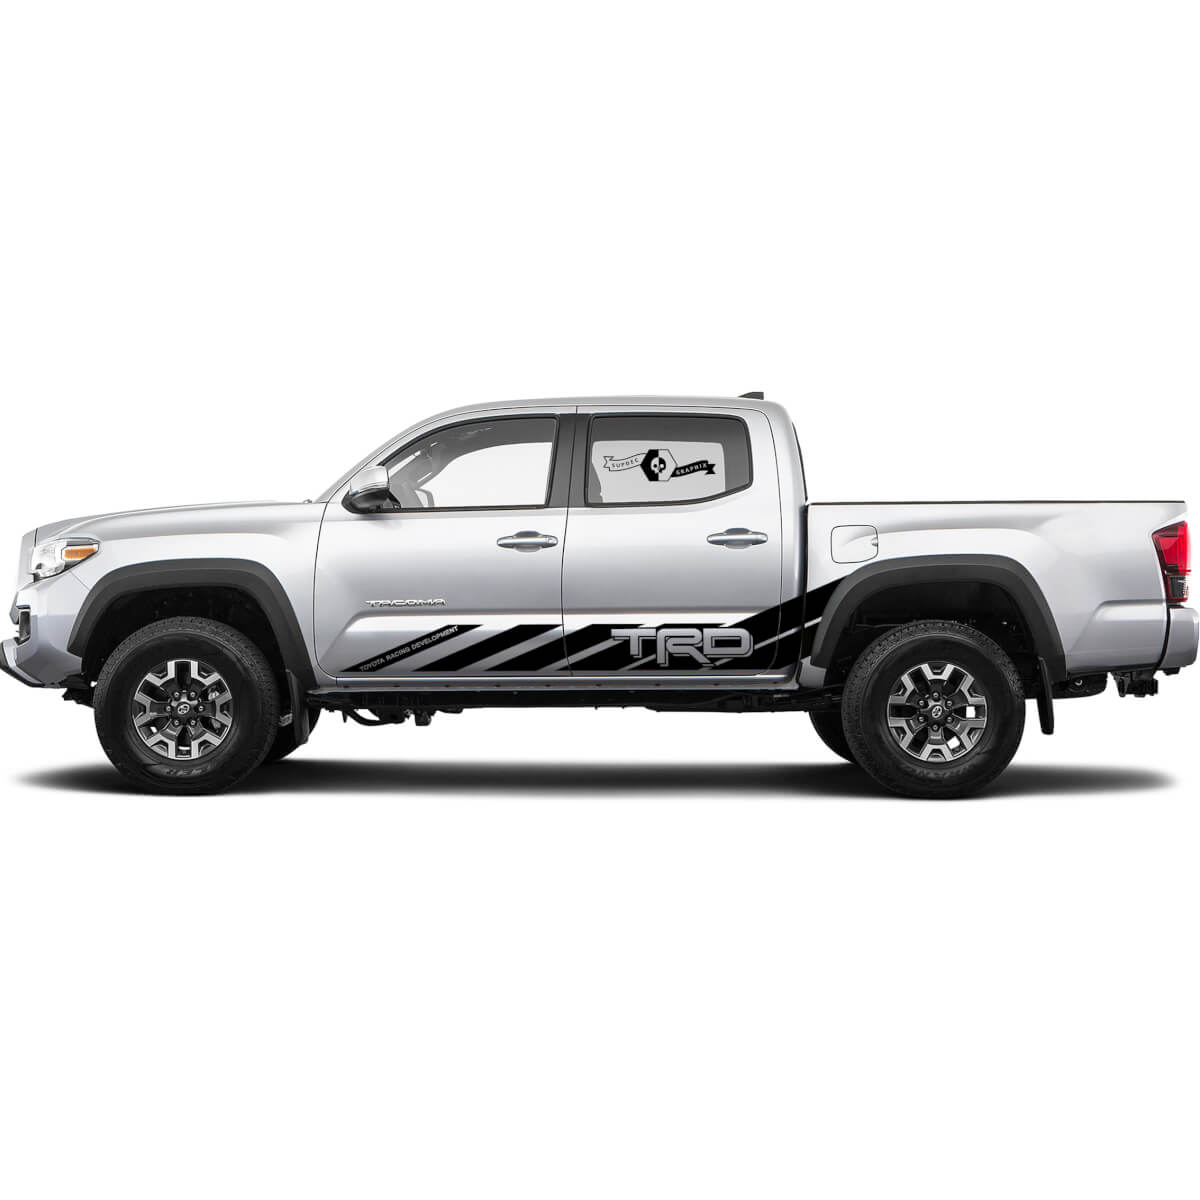 TRD Toyota Racing Development Super Lines for Rocker Panel Decals Stickers for Tacoma FJ Cruiser Tundra and others